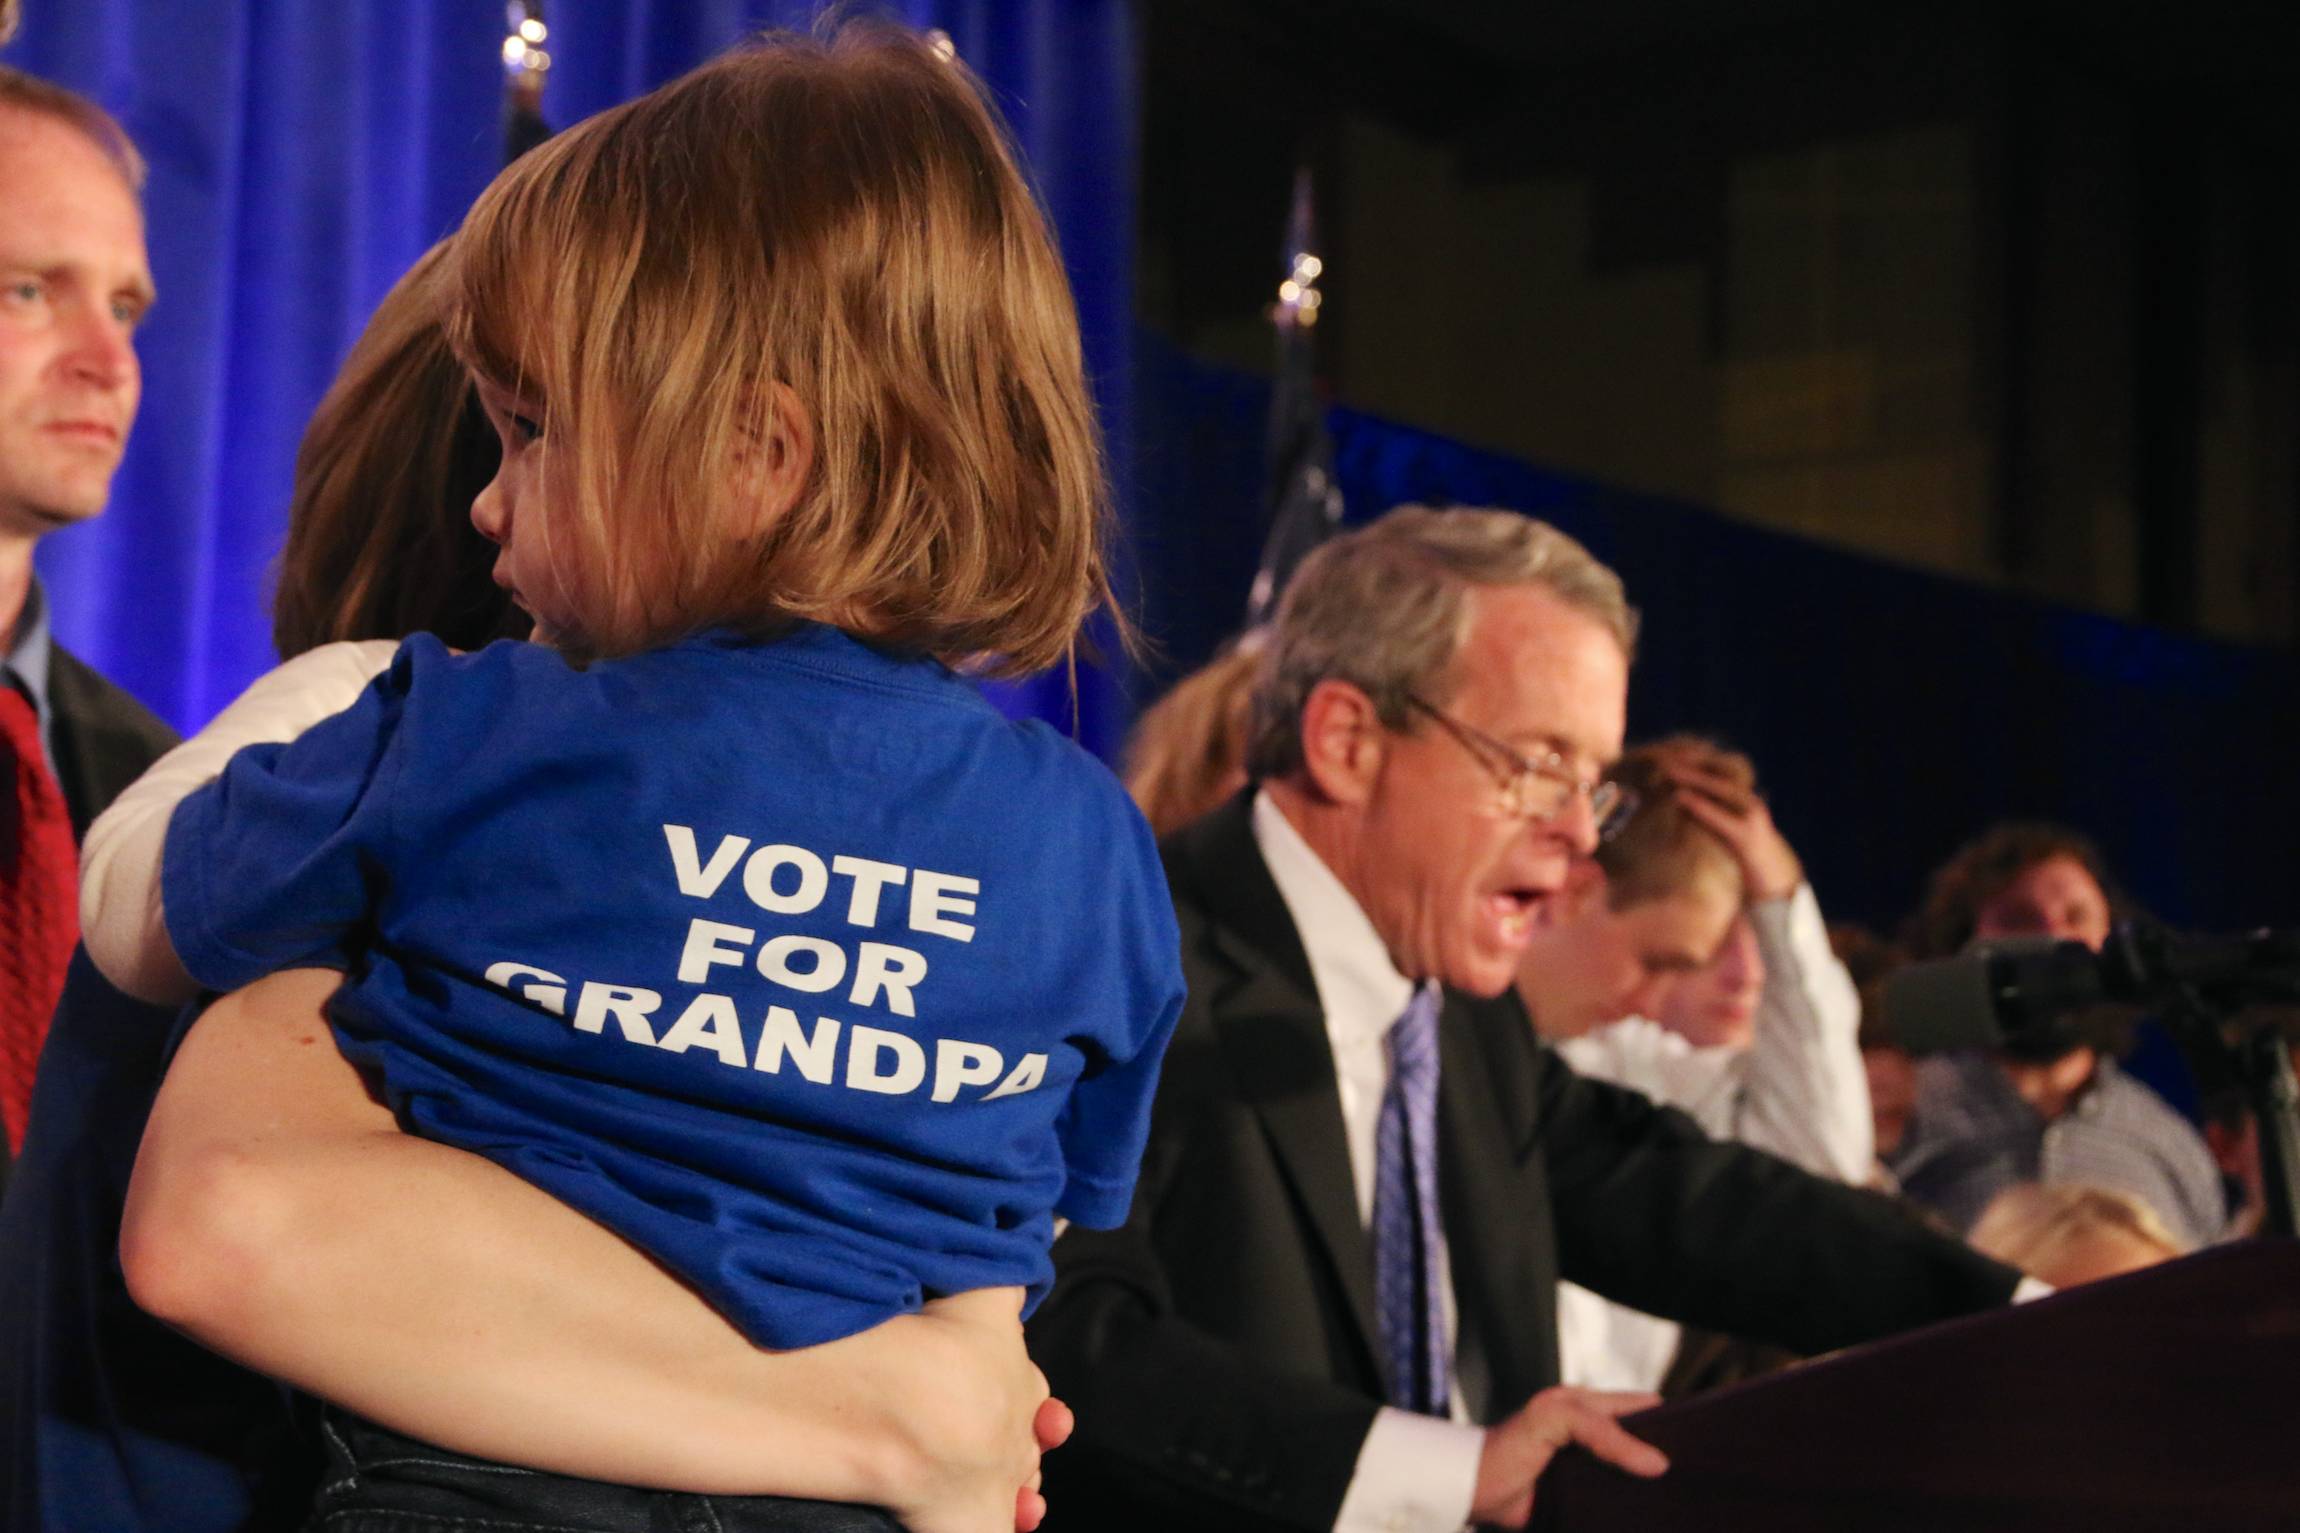 A attorney geneal of Ohio Mike DeWine, speeks, accompagnied by his family, at a Republican Party event in the Renaissance hotel in Columbus, Ohio, Tuesday, Nov. 4 2014, after being reelected in his office.